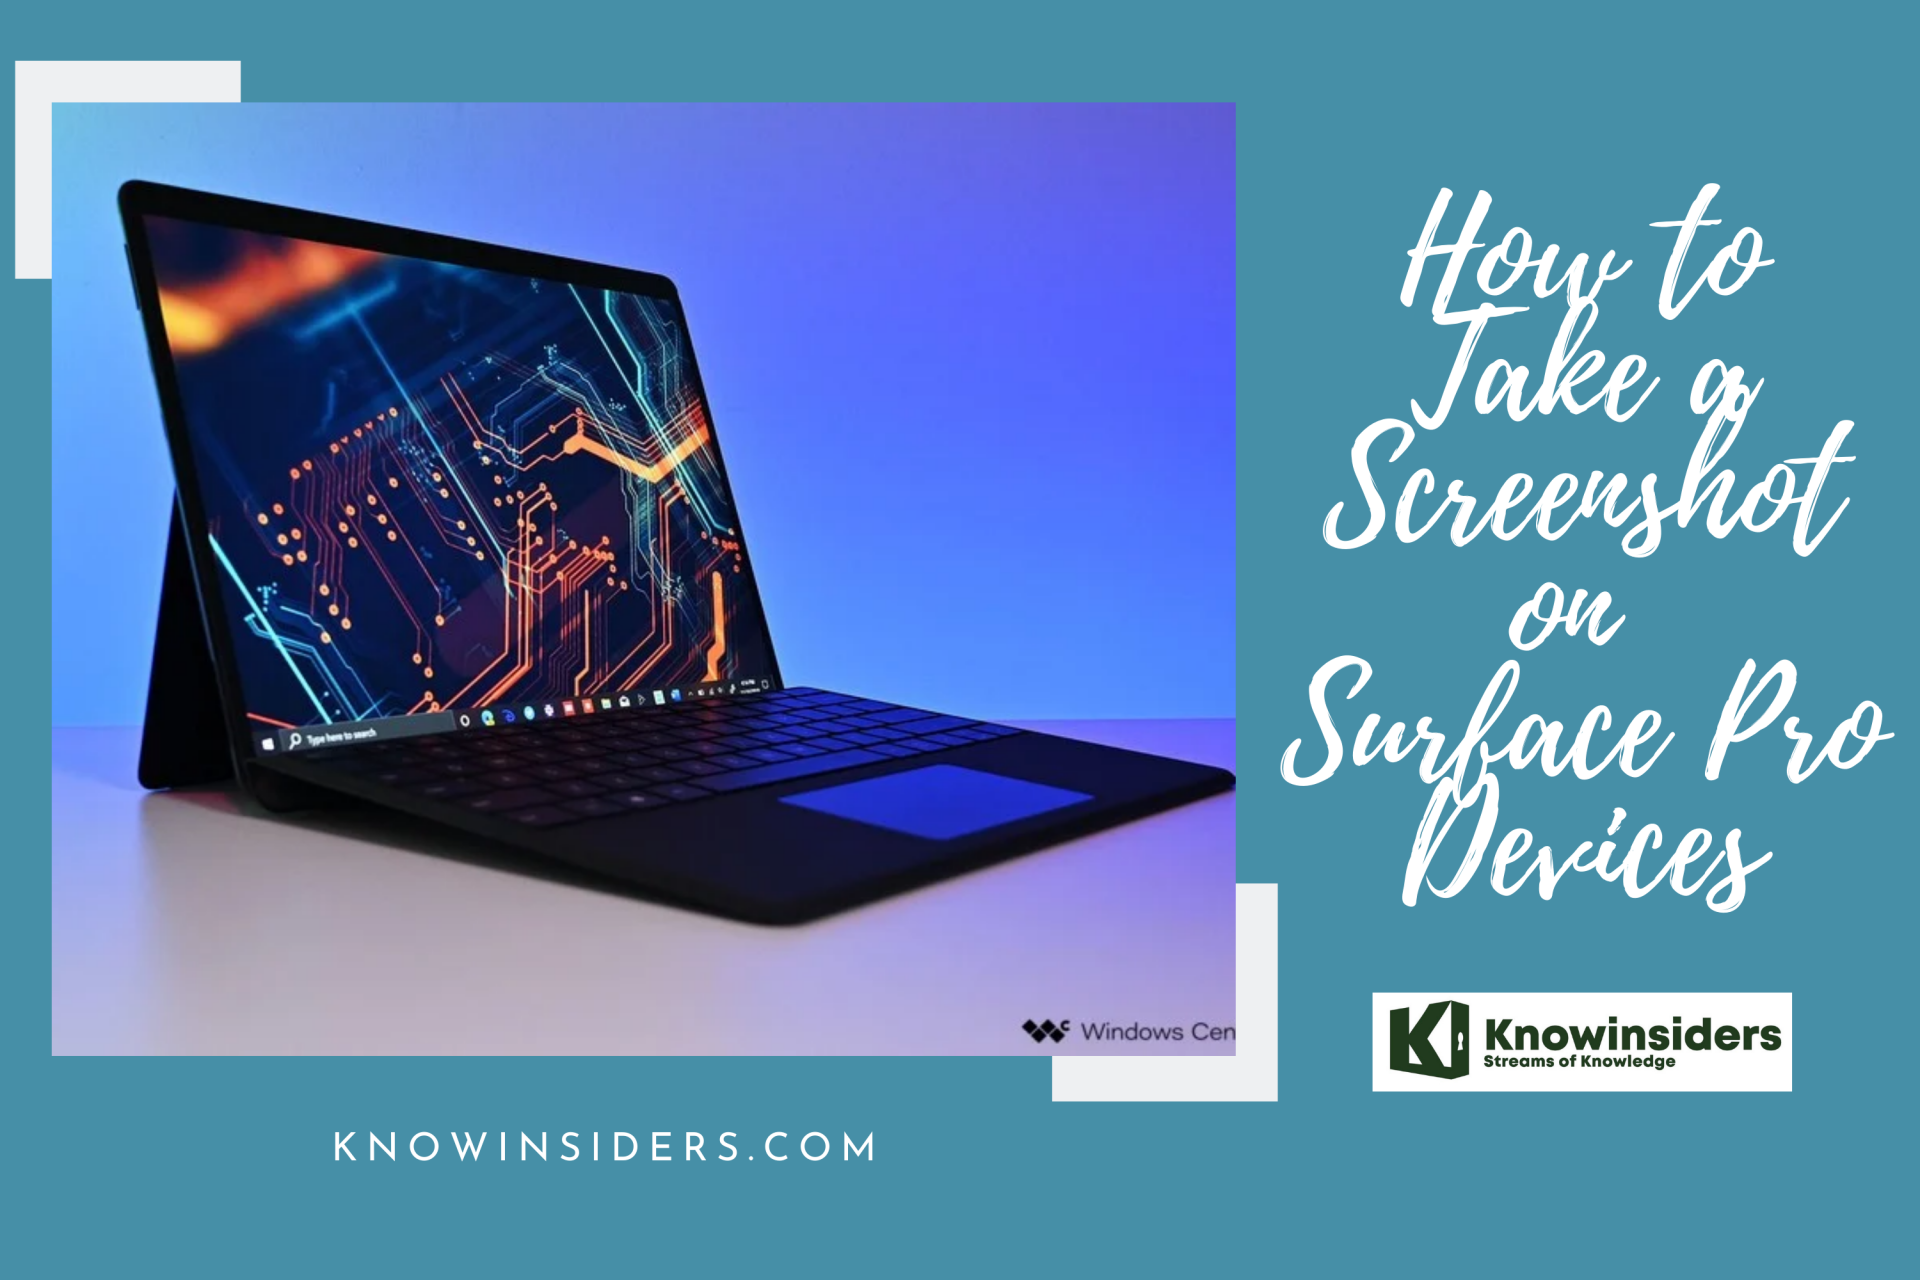 How to Take Screenshot on Surface Pro Devices: Top 7 Simple Ways